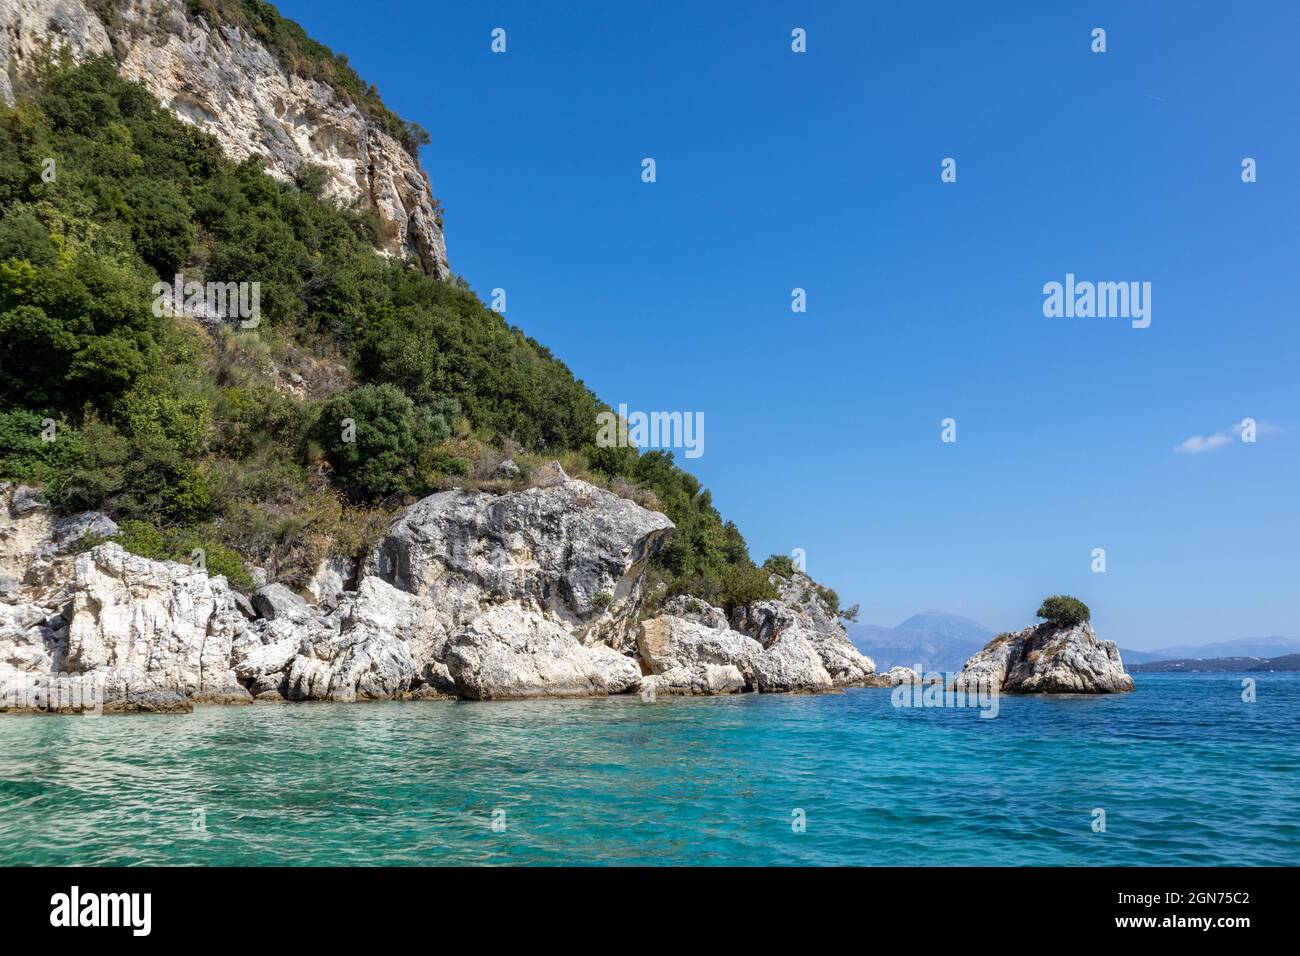 Turquoise Ionian Sea with scenic green cliffs, rocks in water and bright sky. Nature of Ormos Desimi, Lefkada island in Greece. Summer vacation idylli Stock Photo